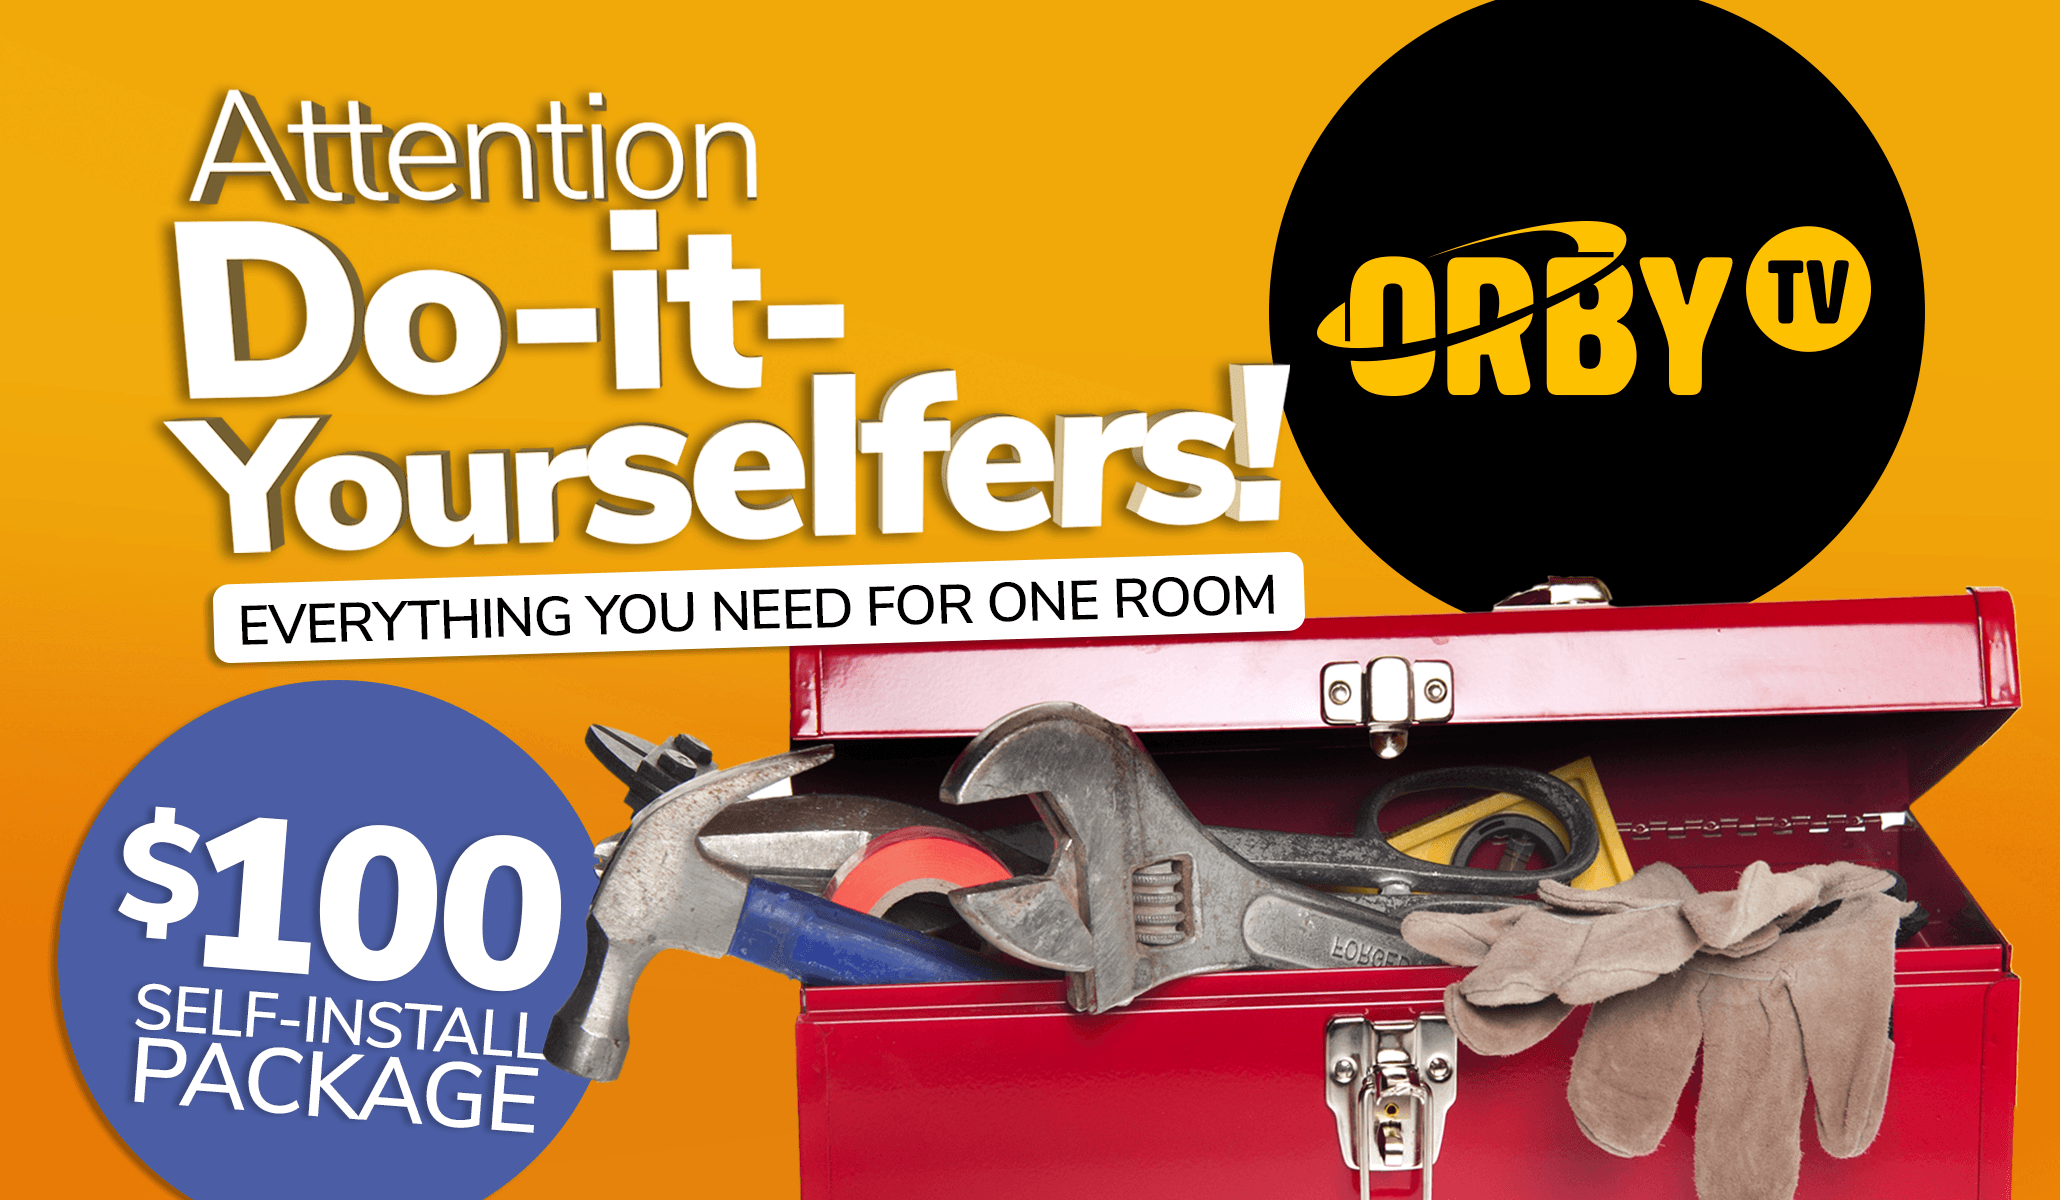 Orby TV Has a New Self-Installation Offer, Available for a Limited Time